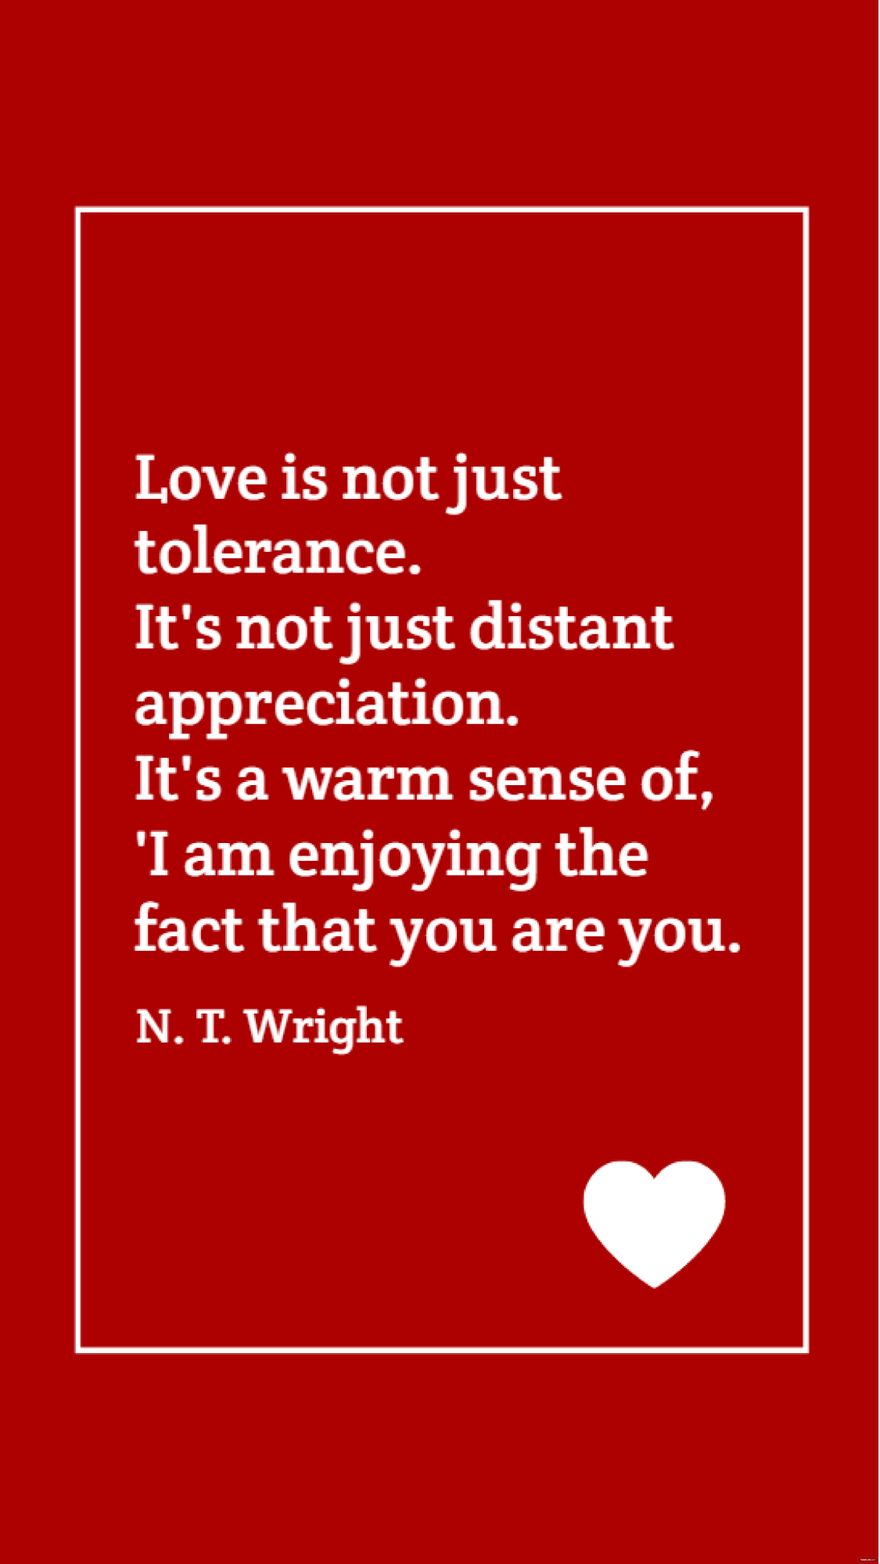 N. T. Wright - Love is not just tolerance. It's not just distant appreciation. It's a warm sense of, 'I am enjoying the fact that you are you.